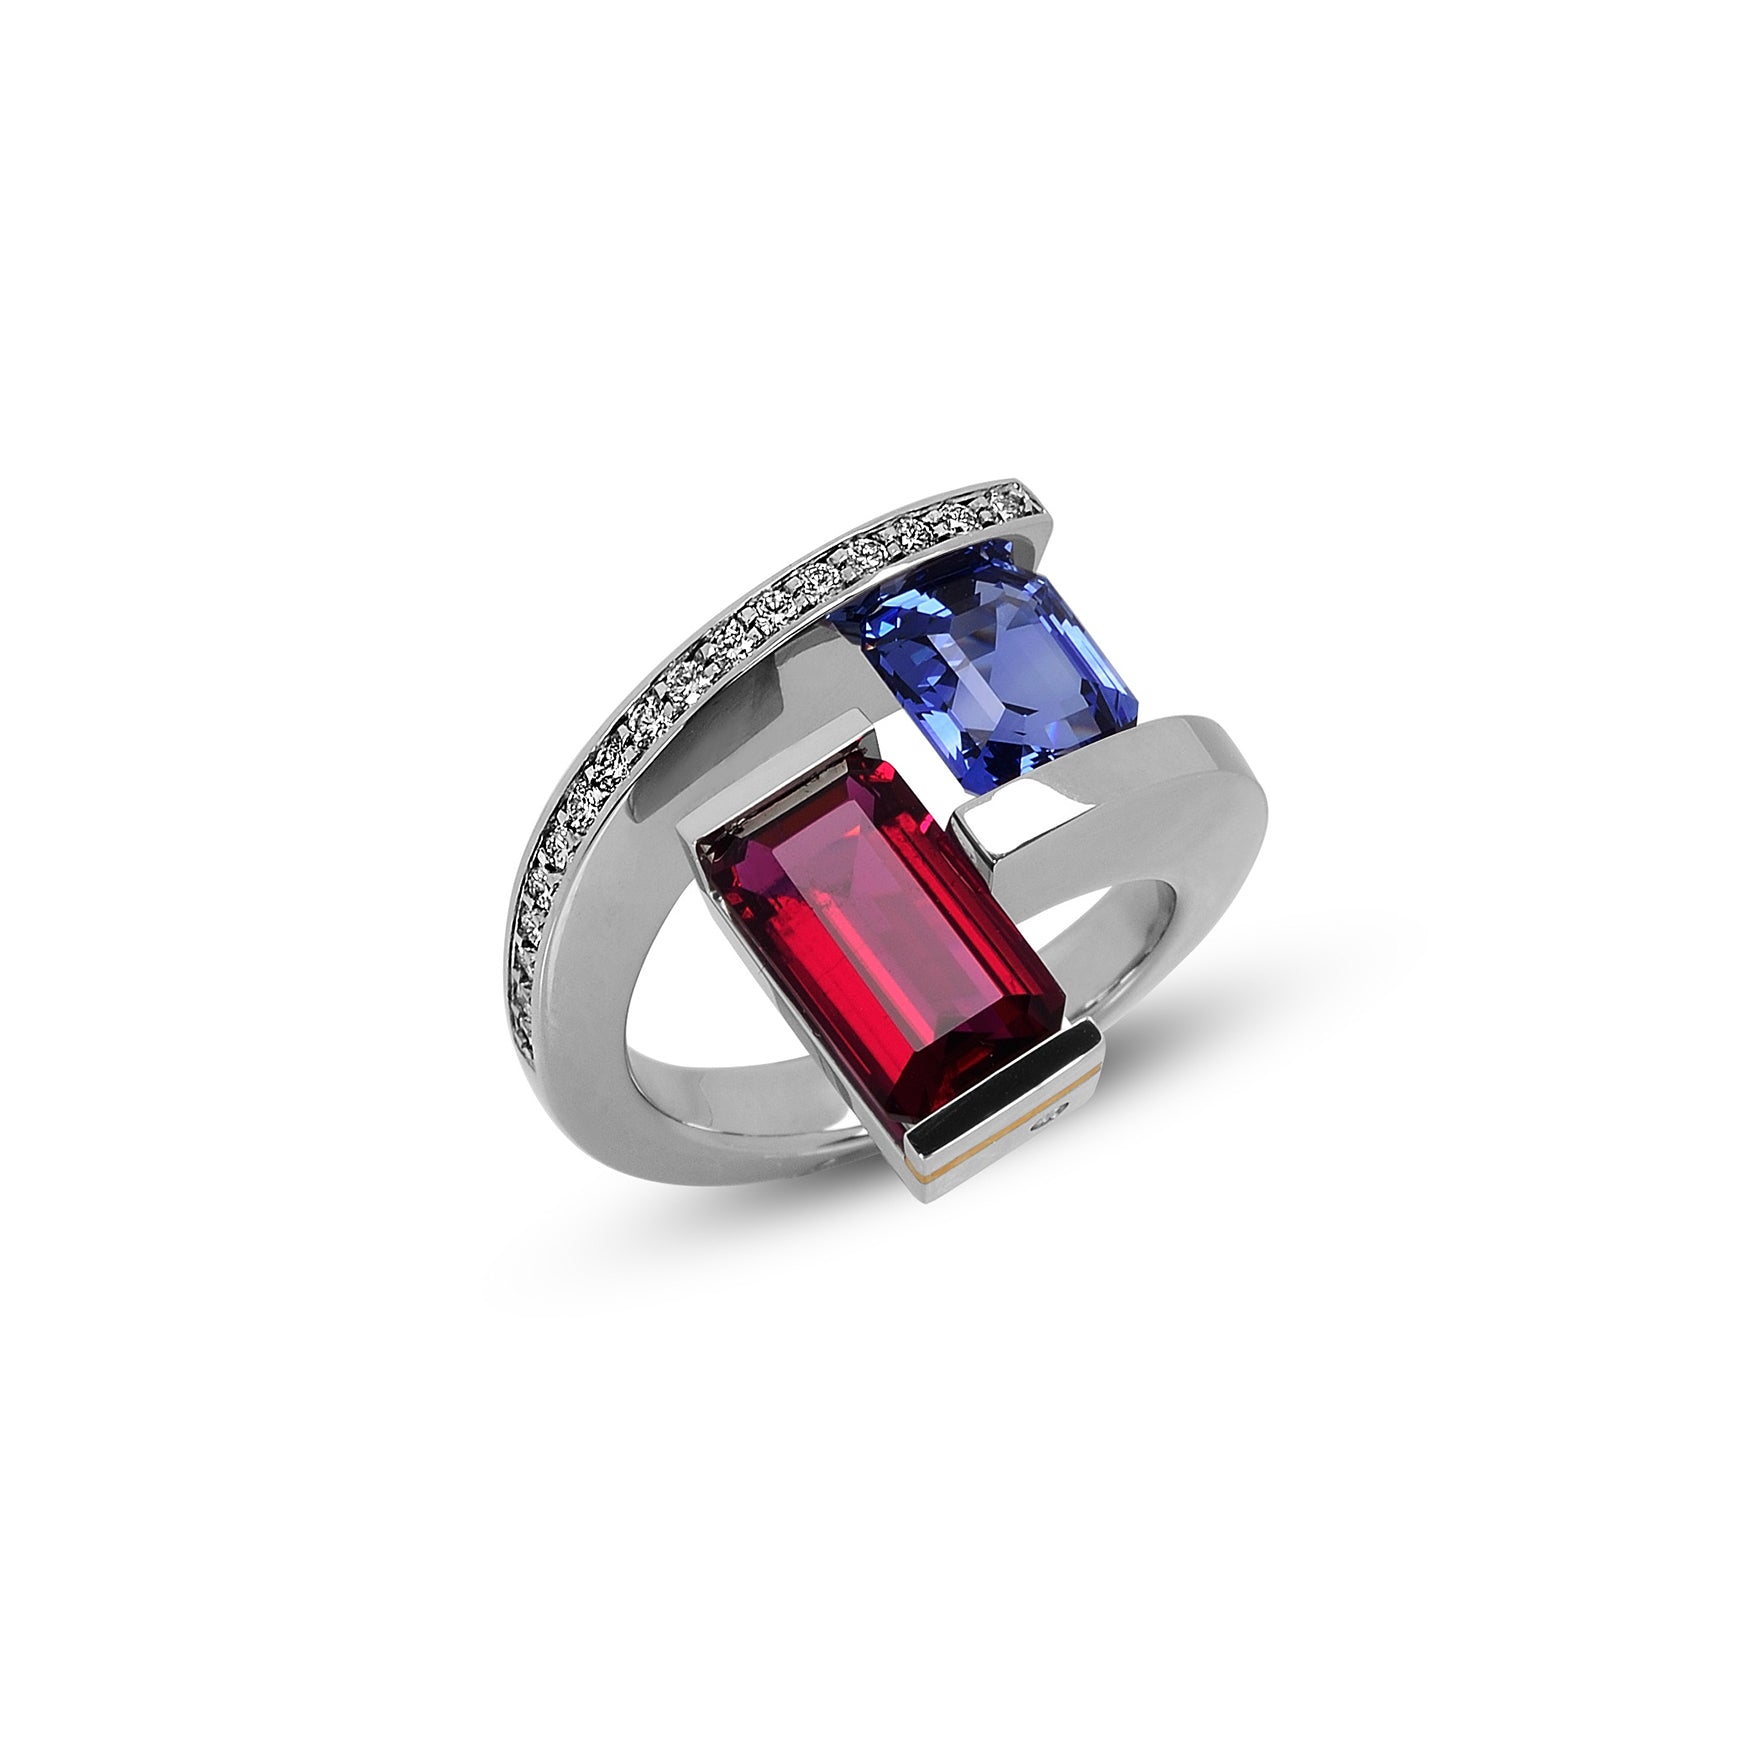 Platinum/24K V3 Tension Ring with Pink Sapphire